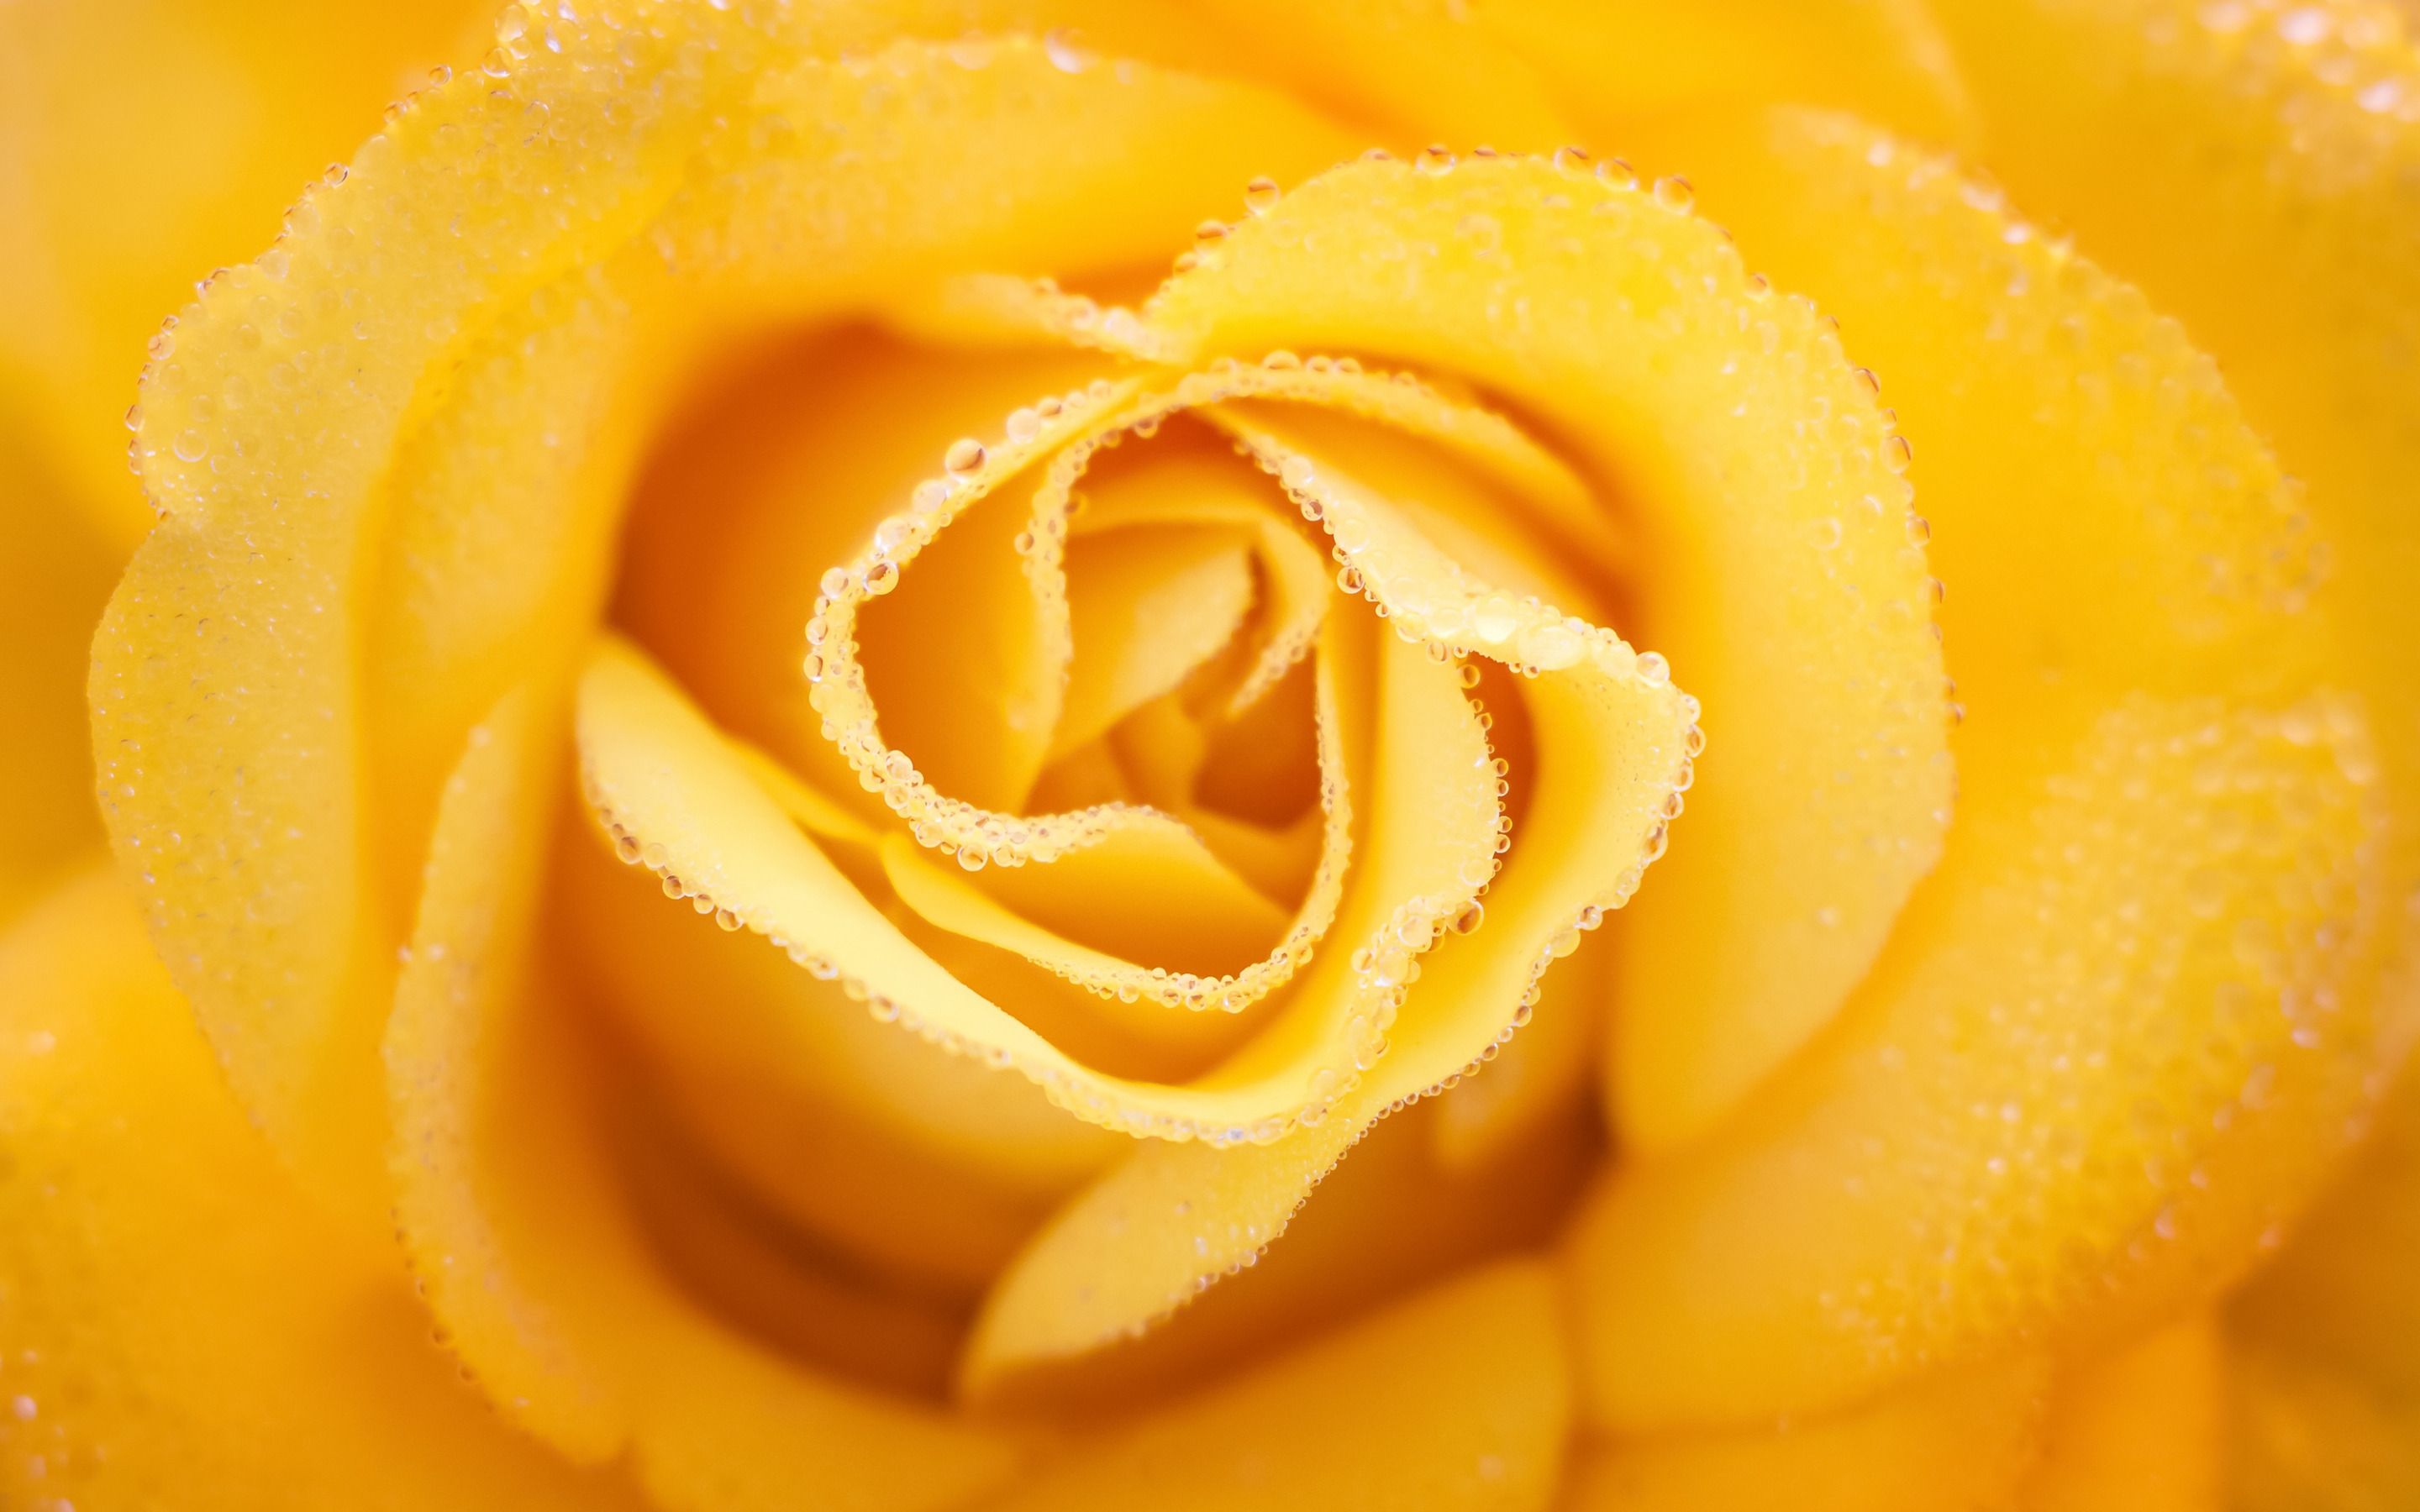 2880x1800 Download wallpaper yellow rose bud, water droplets on a rose, yellow rose, beautiful yellow flower, roses for desktop with resolution 2880x1800. High Quality HD picture wallpaper on WallpaperBat